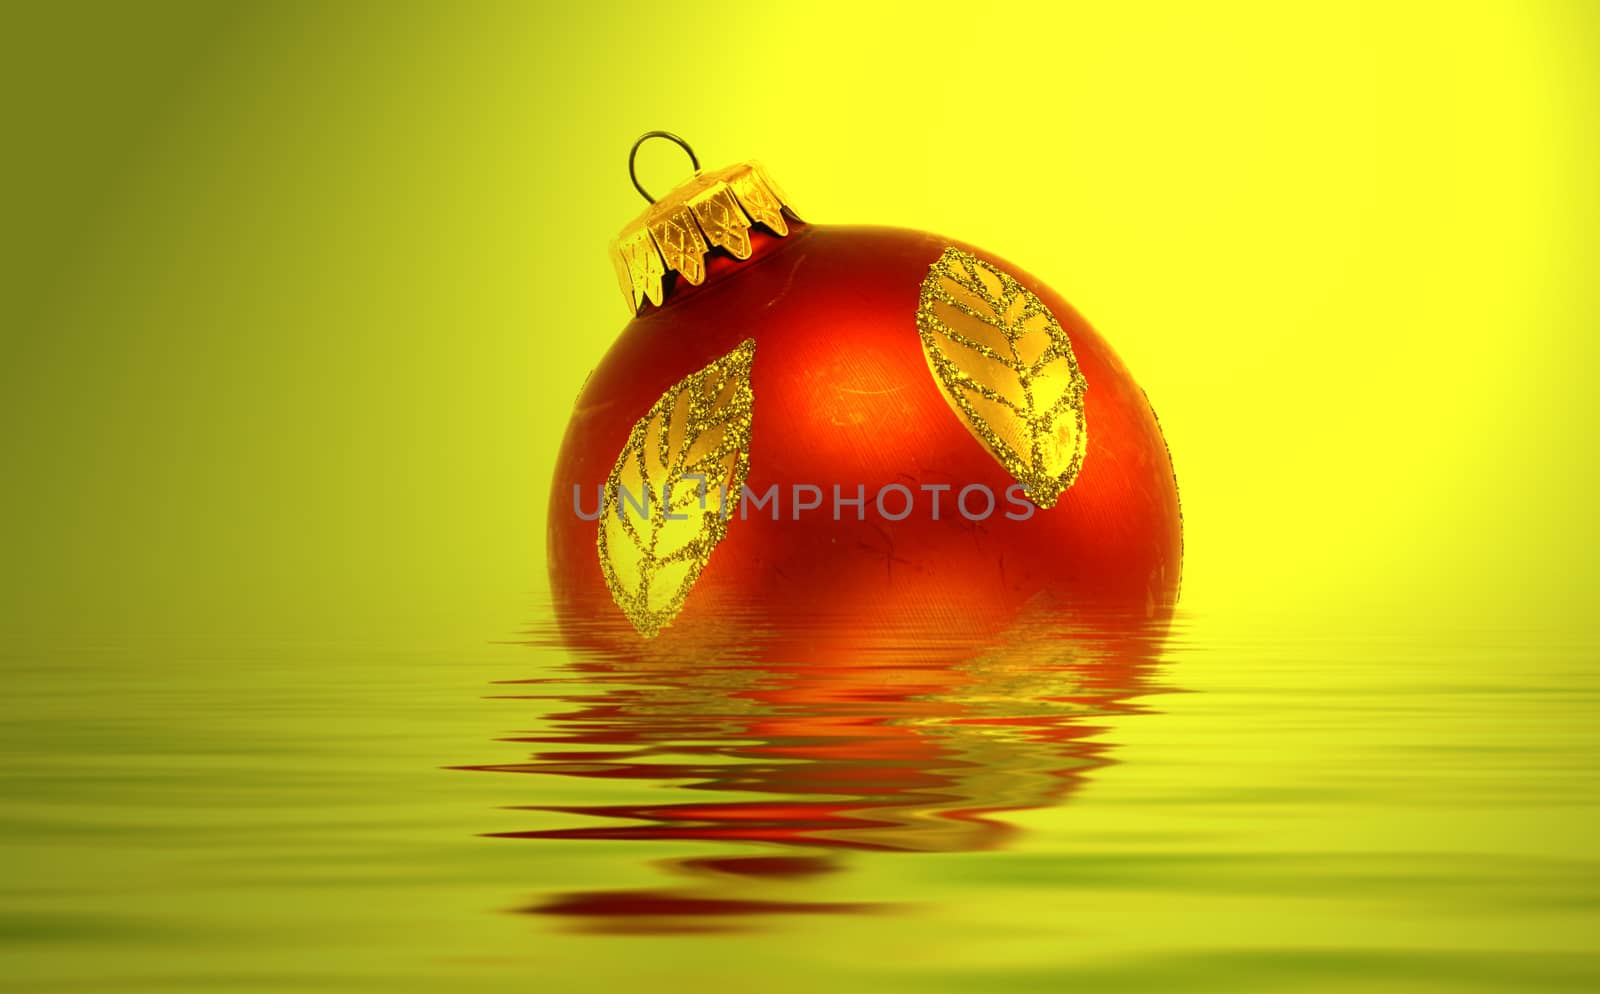 Great RED christmas globe by arosoft